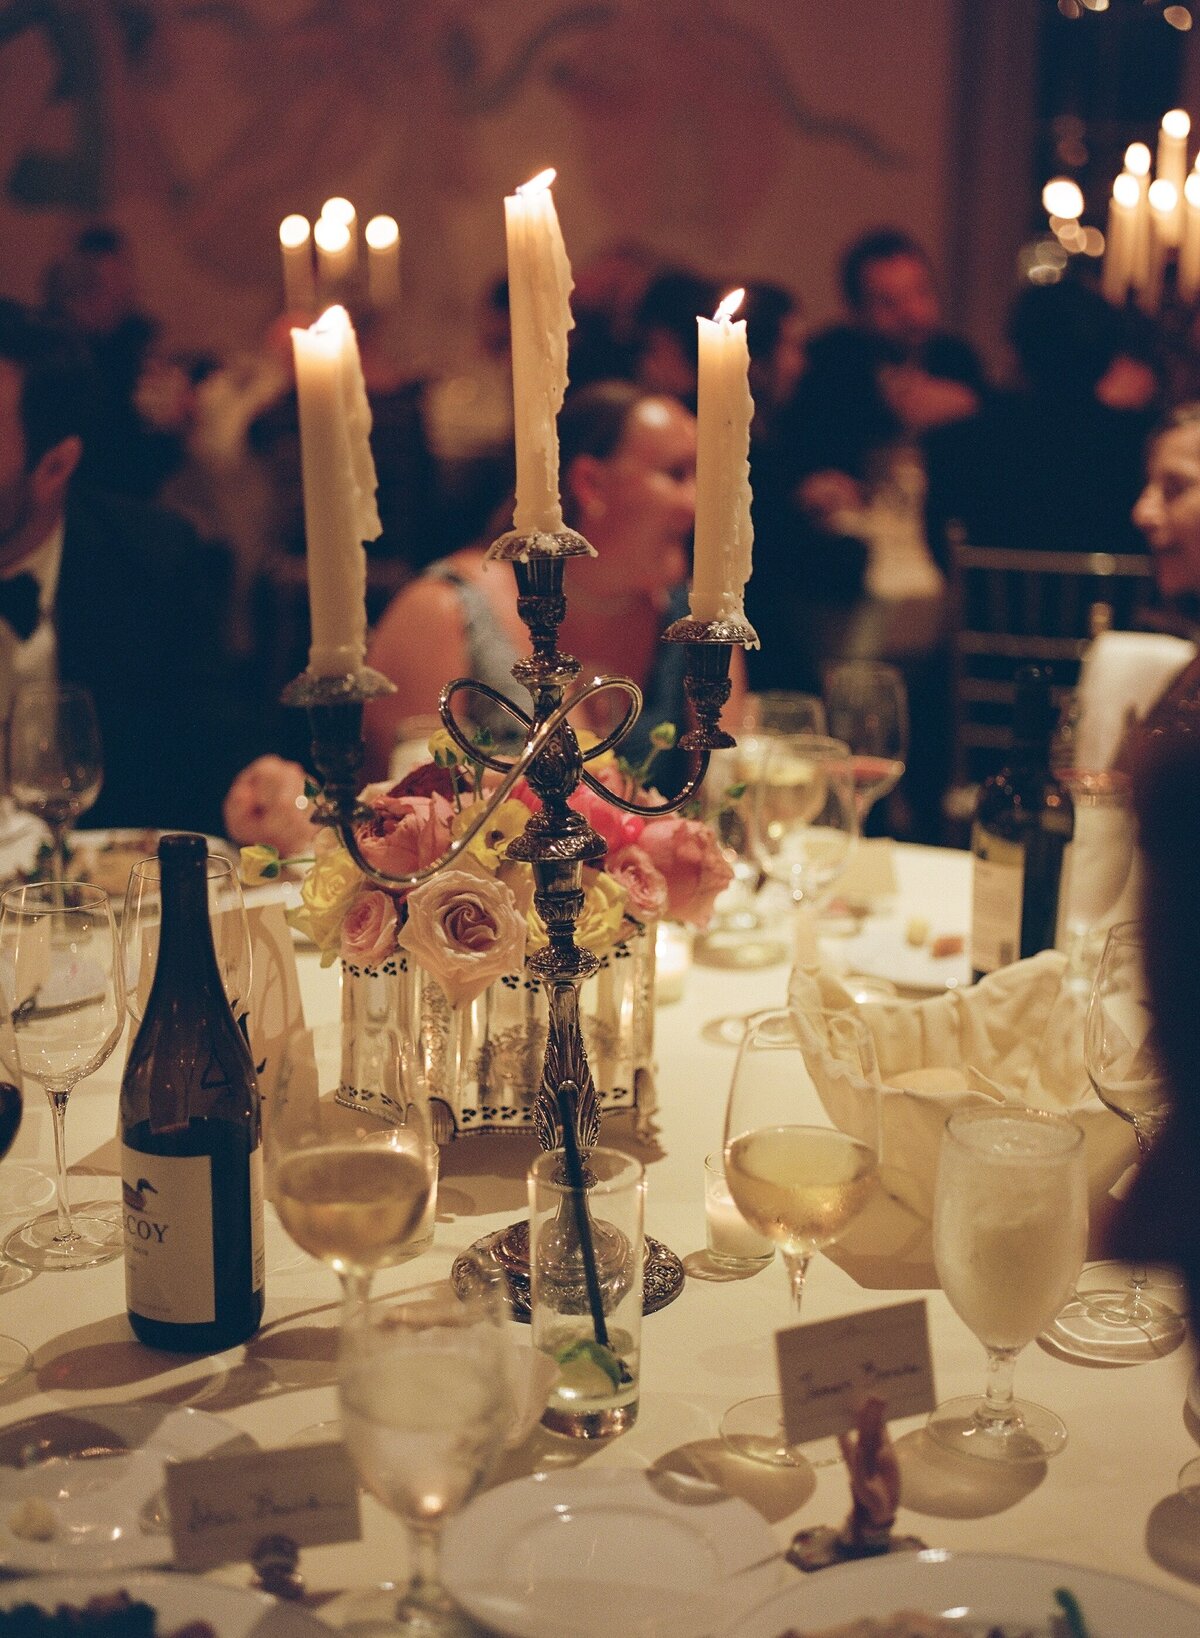 wax dripping down candle  at wedding